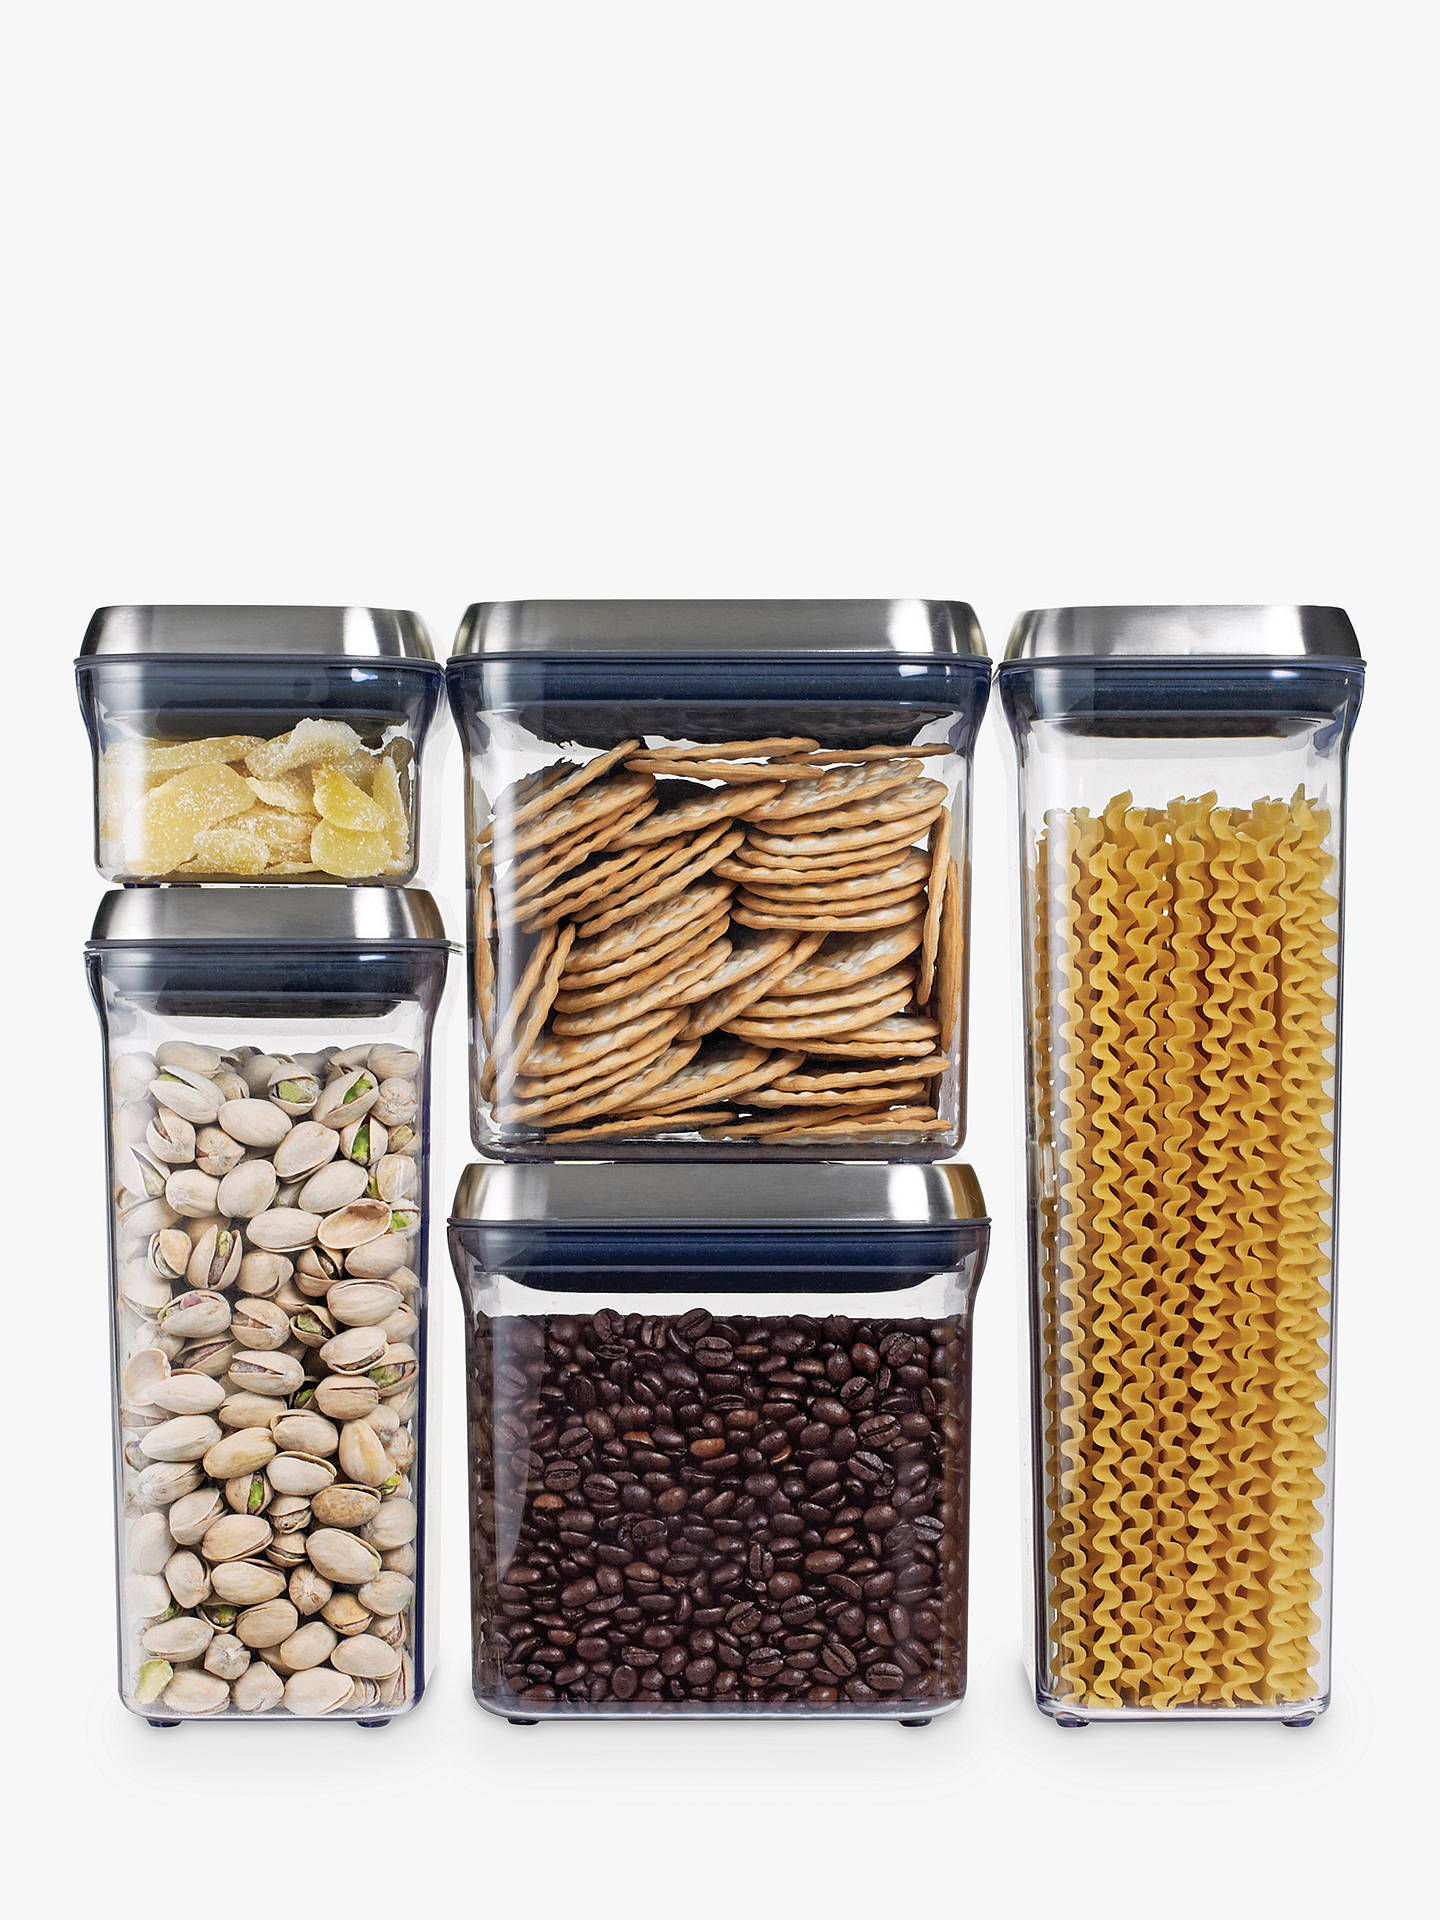 oxo storage containers